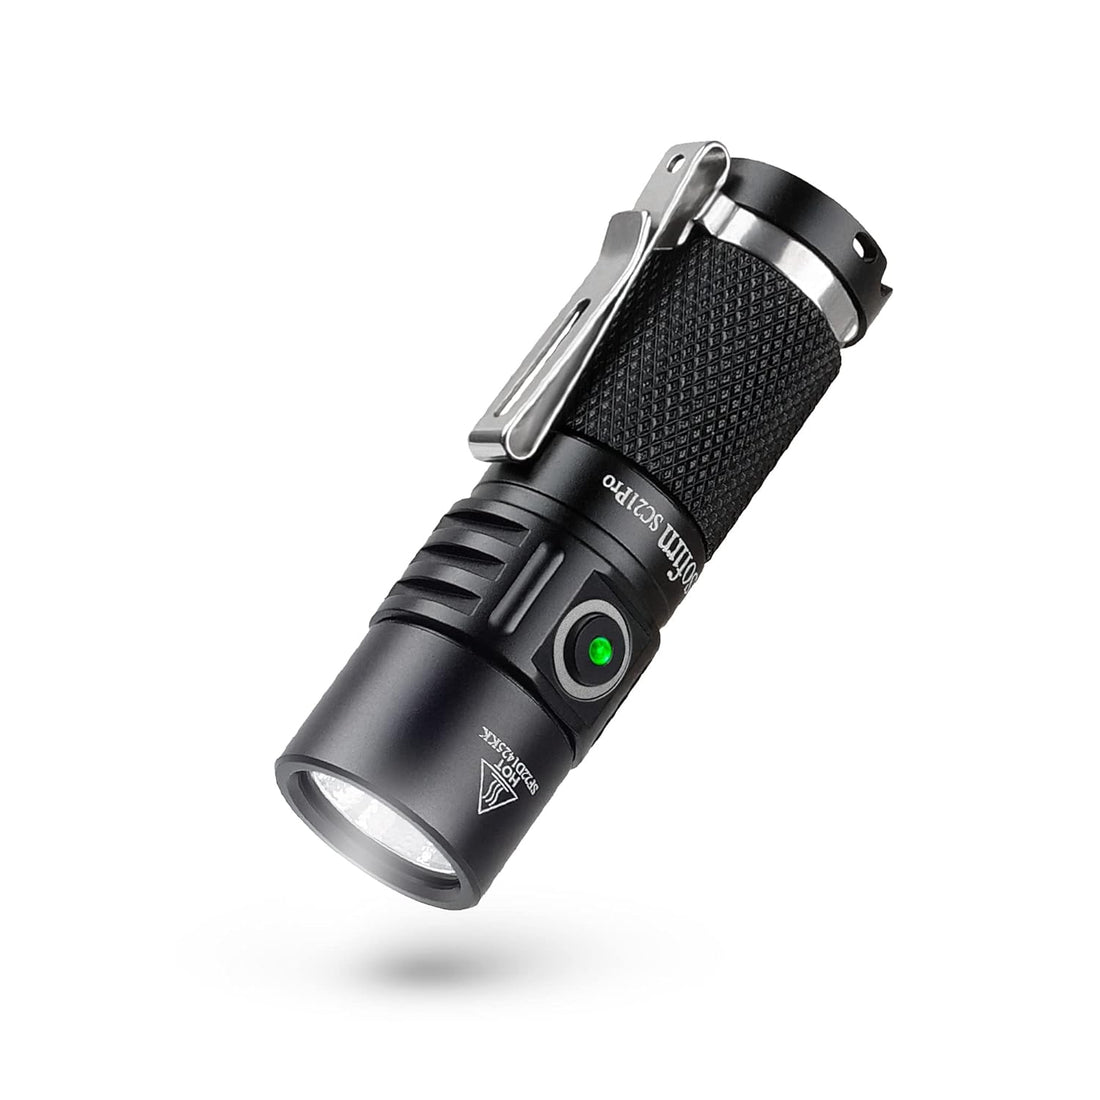 Mini Flashlight, Sofirn SC21 Pro with Upgraded Anduril 2.0 UI, Super Bright 90 High CRI Samsung LH351D with Max Output of 1100lm, Small Pocket EDC, USBC Rechargeable